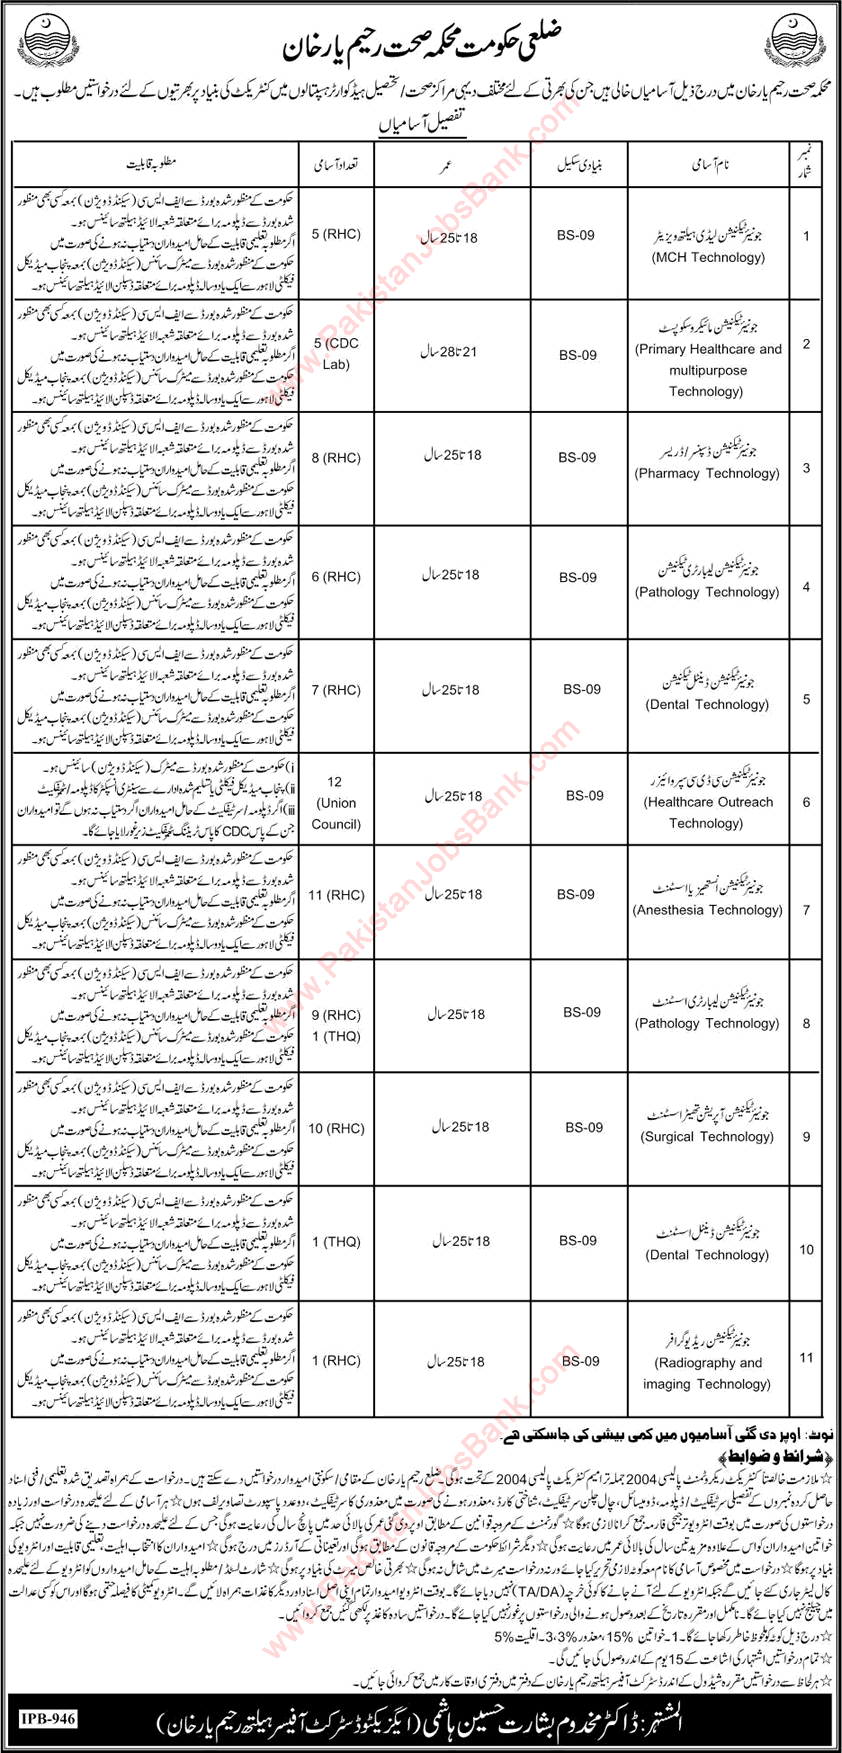 Health Department Rahim Yar Khan Jobs 2016 August CDC Supervisors, OT / Anesthesia Assistants & Others Latest